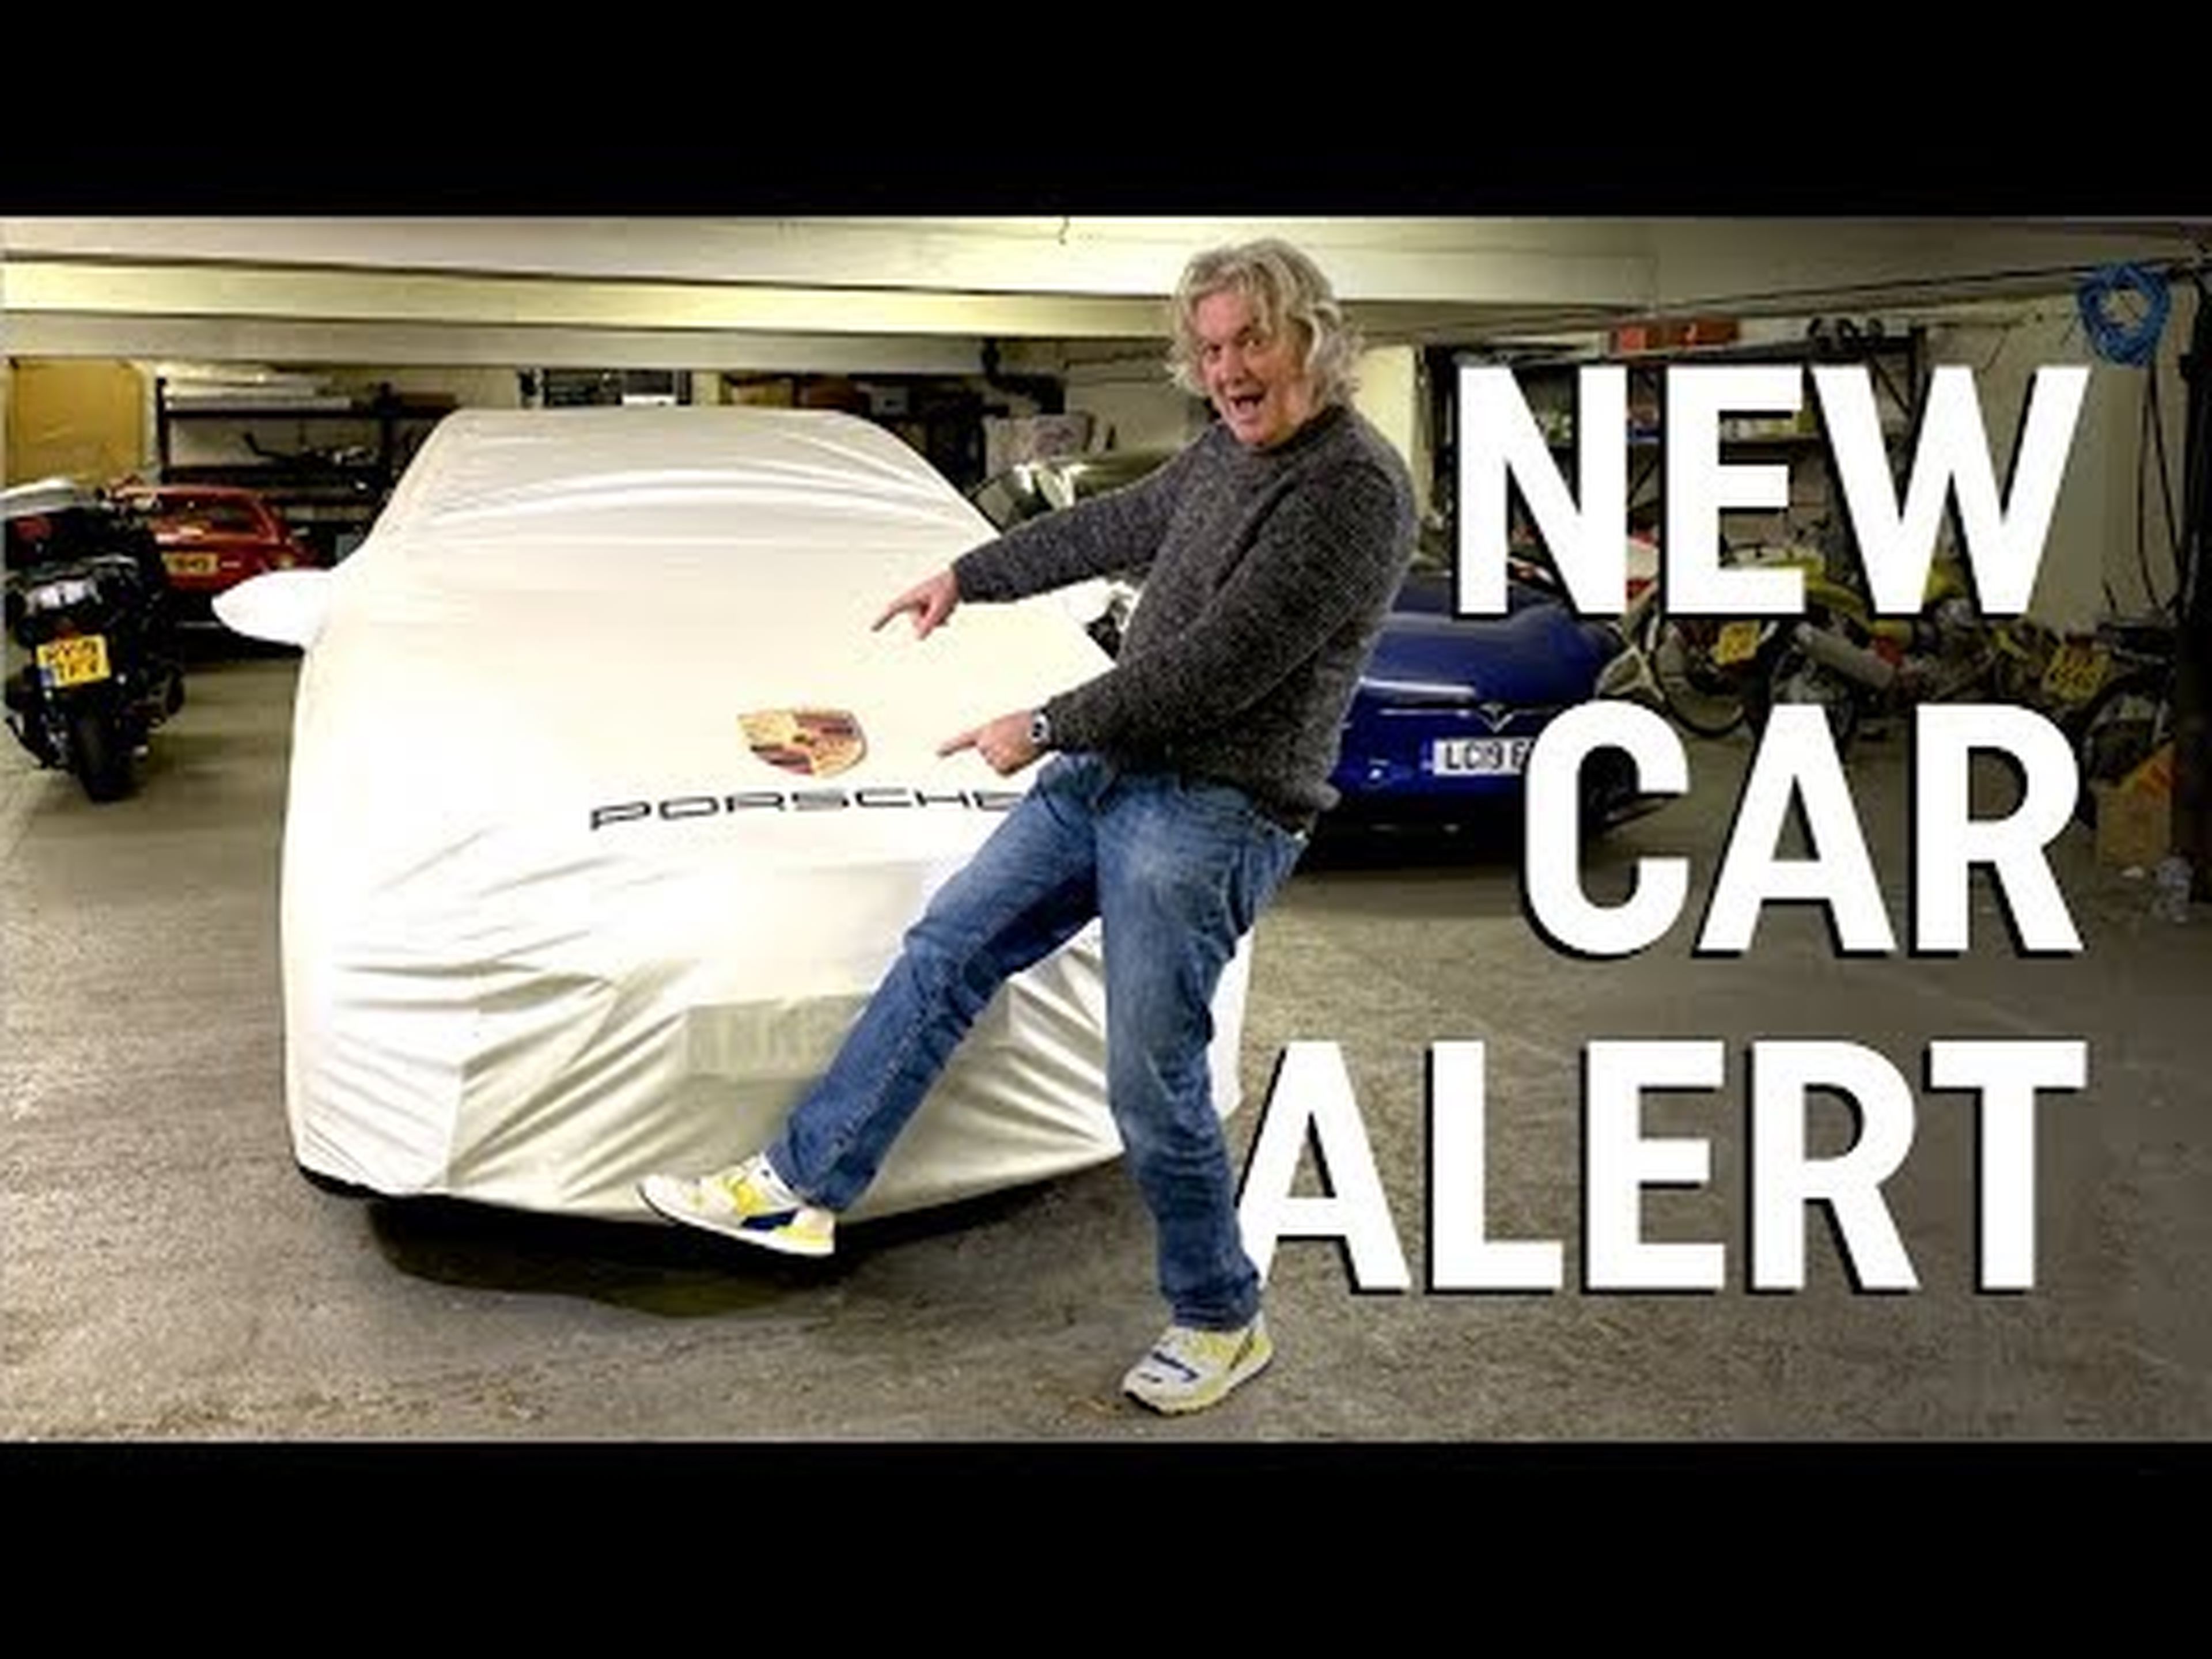 James May has bought ANOTHER new car